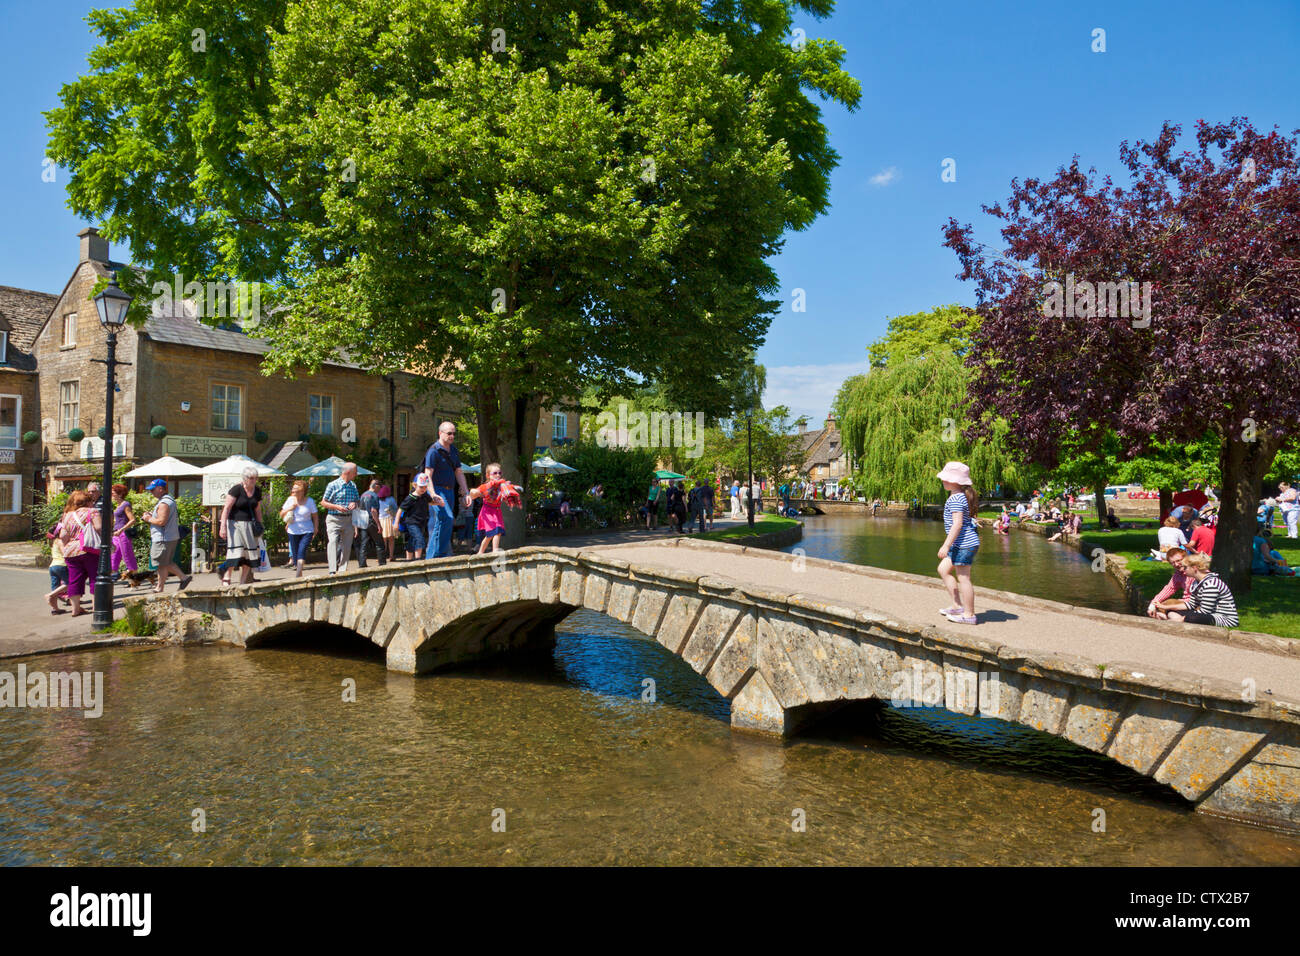 Cotswold Village in Bourton on the Water mit Brücke über den Fluss Windrush in Bourton on the Water Cotswolds Gloucestershire England GB Europa Stockfoto